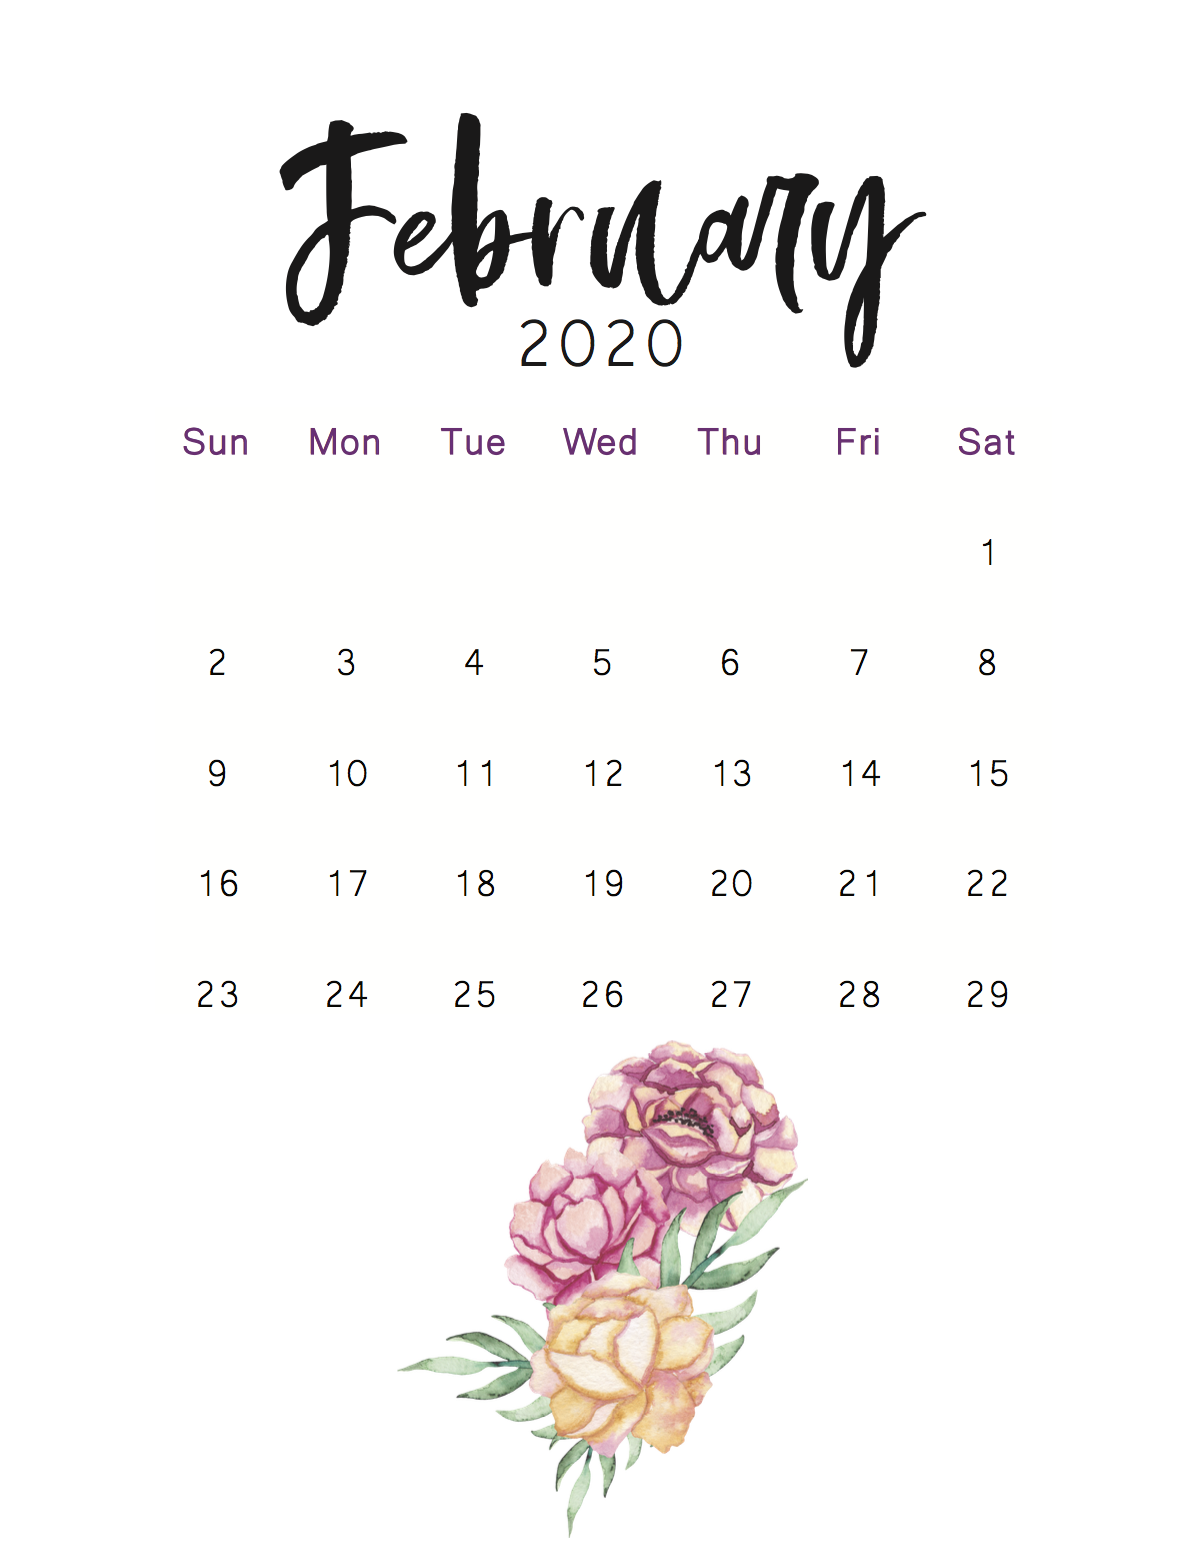 February Calendars For Home Or Office Onedes